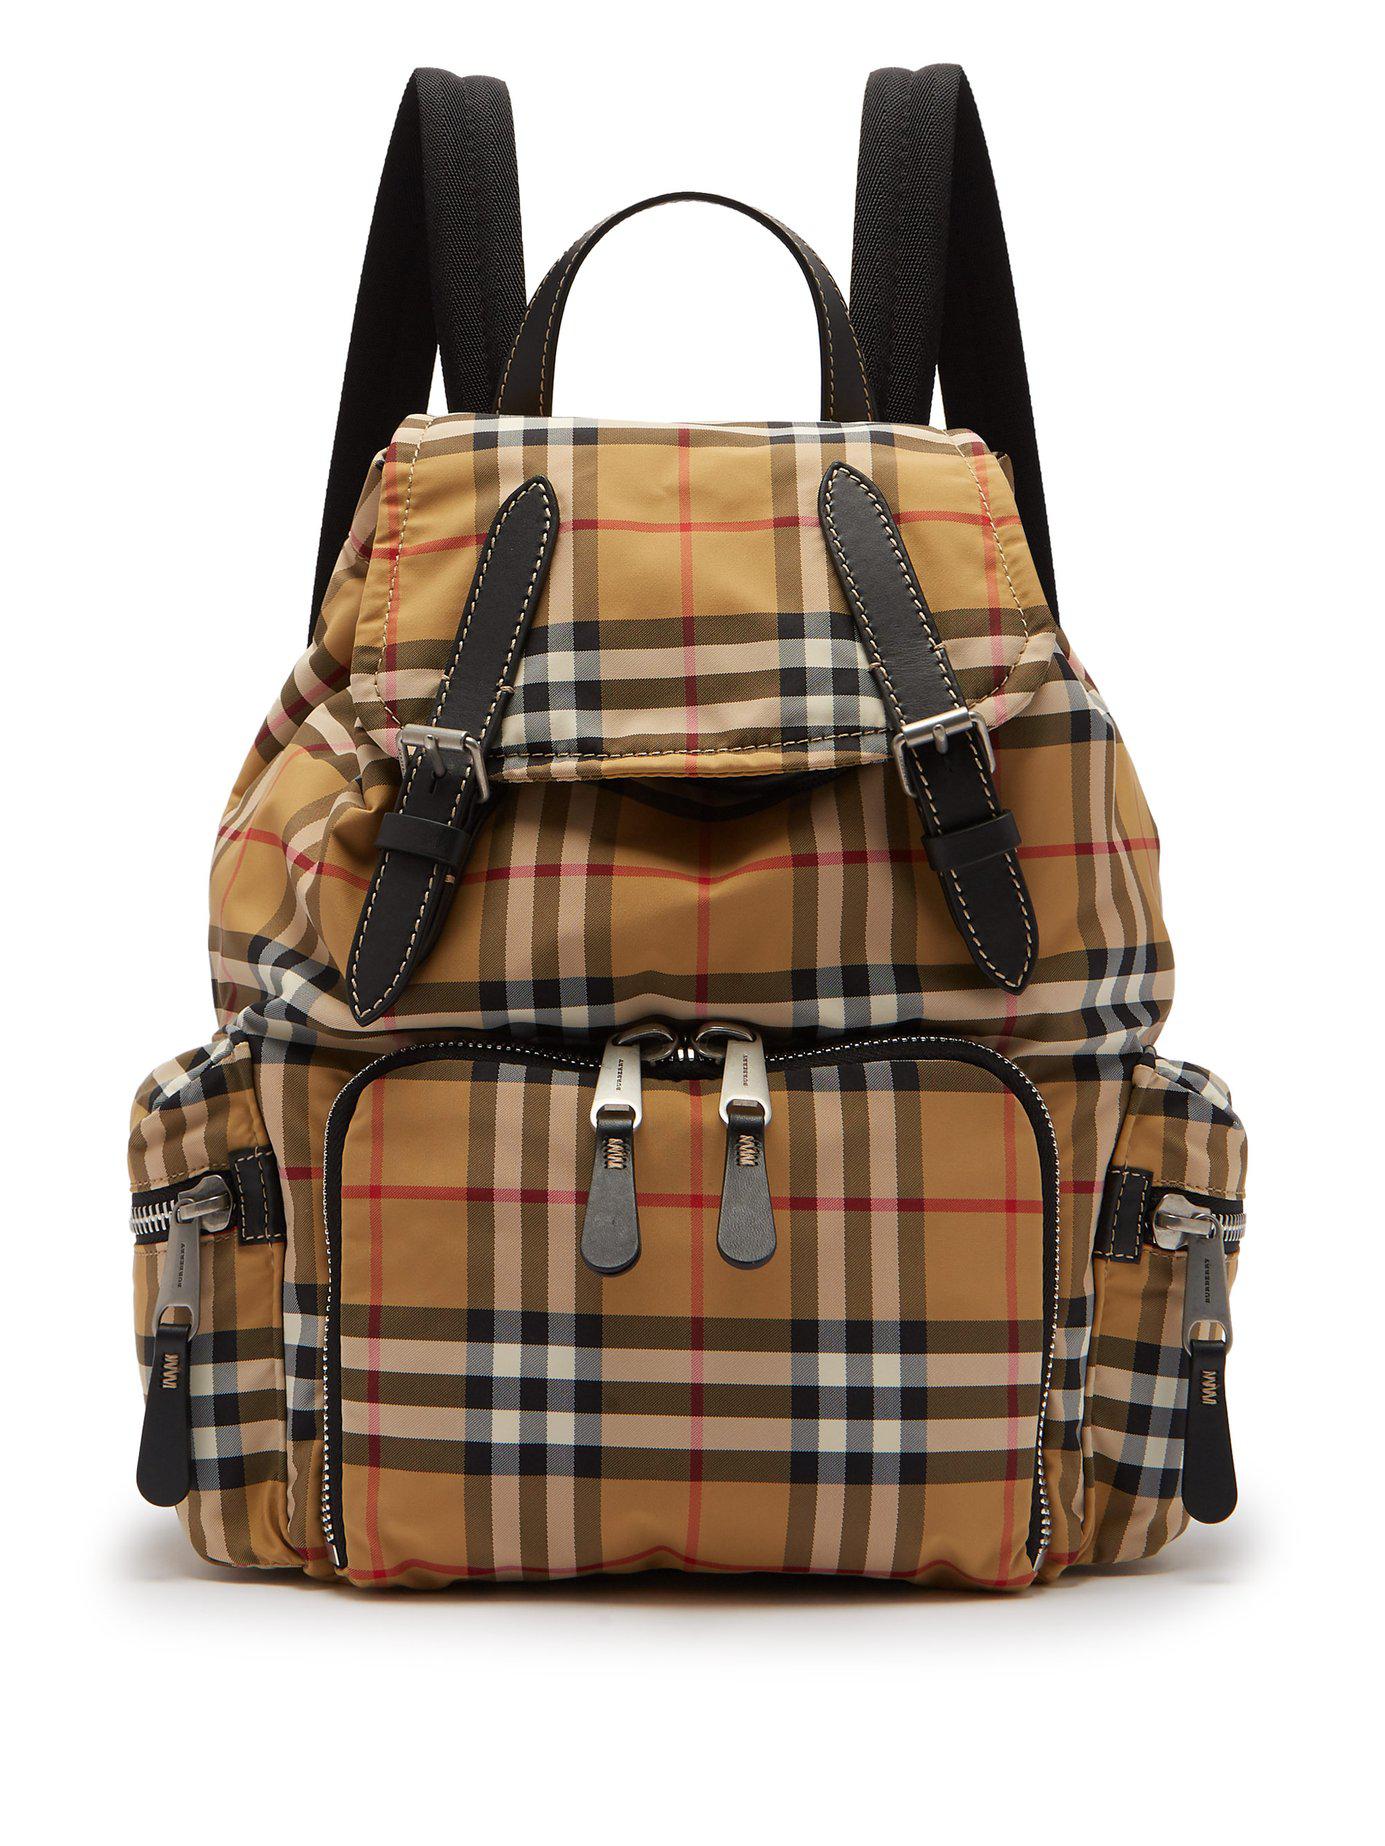 Burberry Backpack Black And Brown | IUCN Water